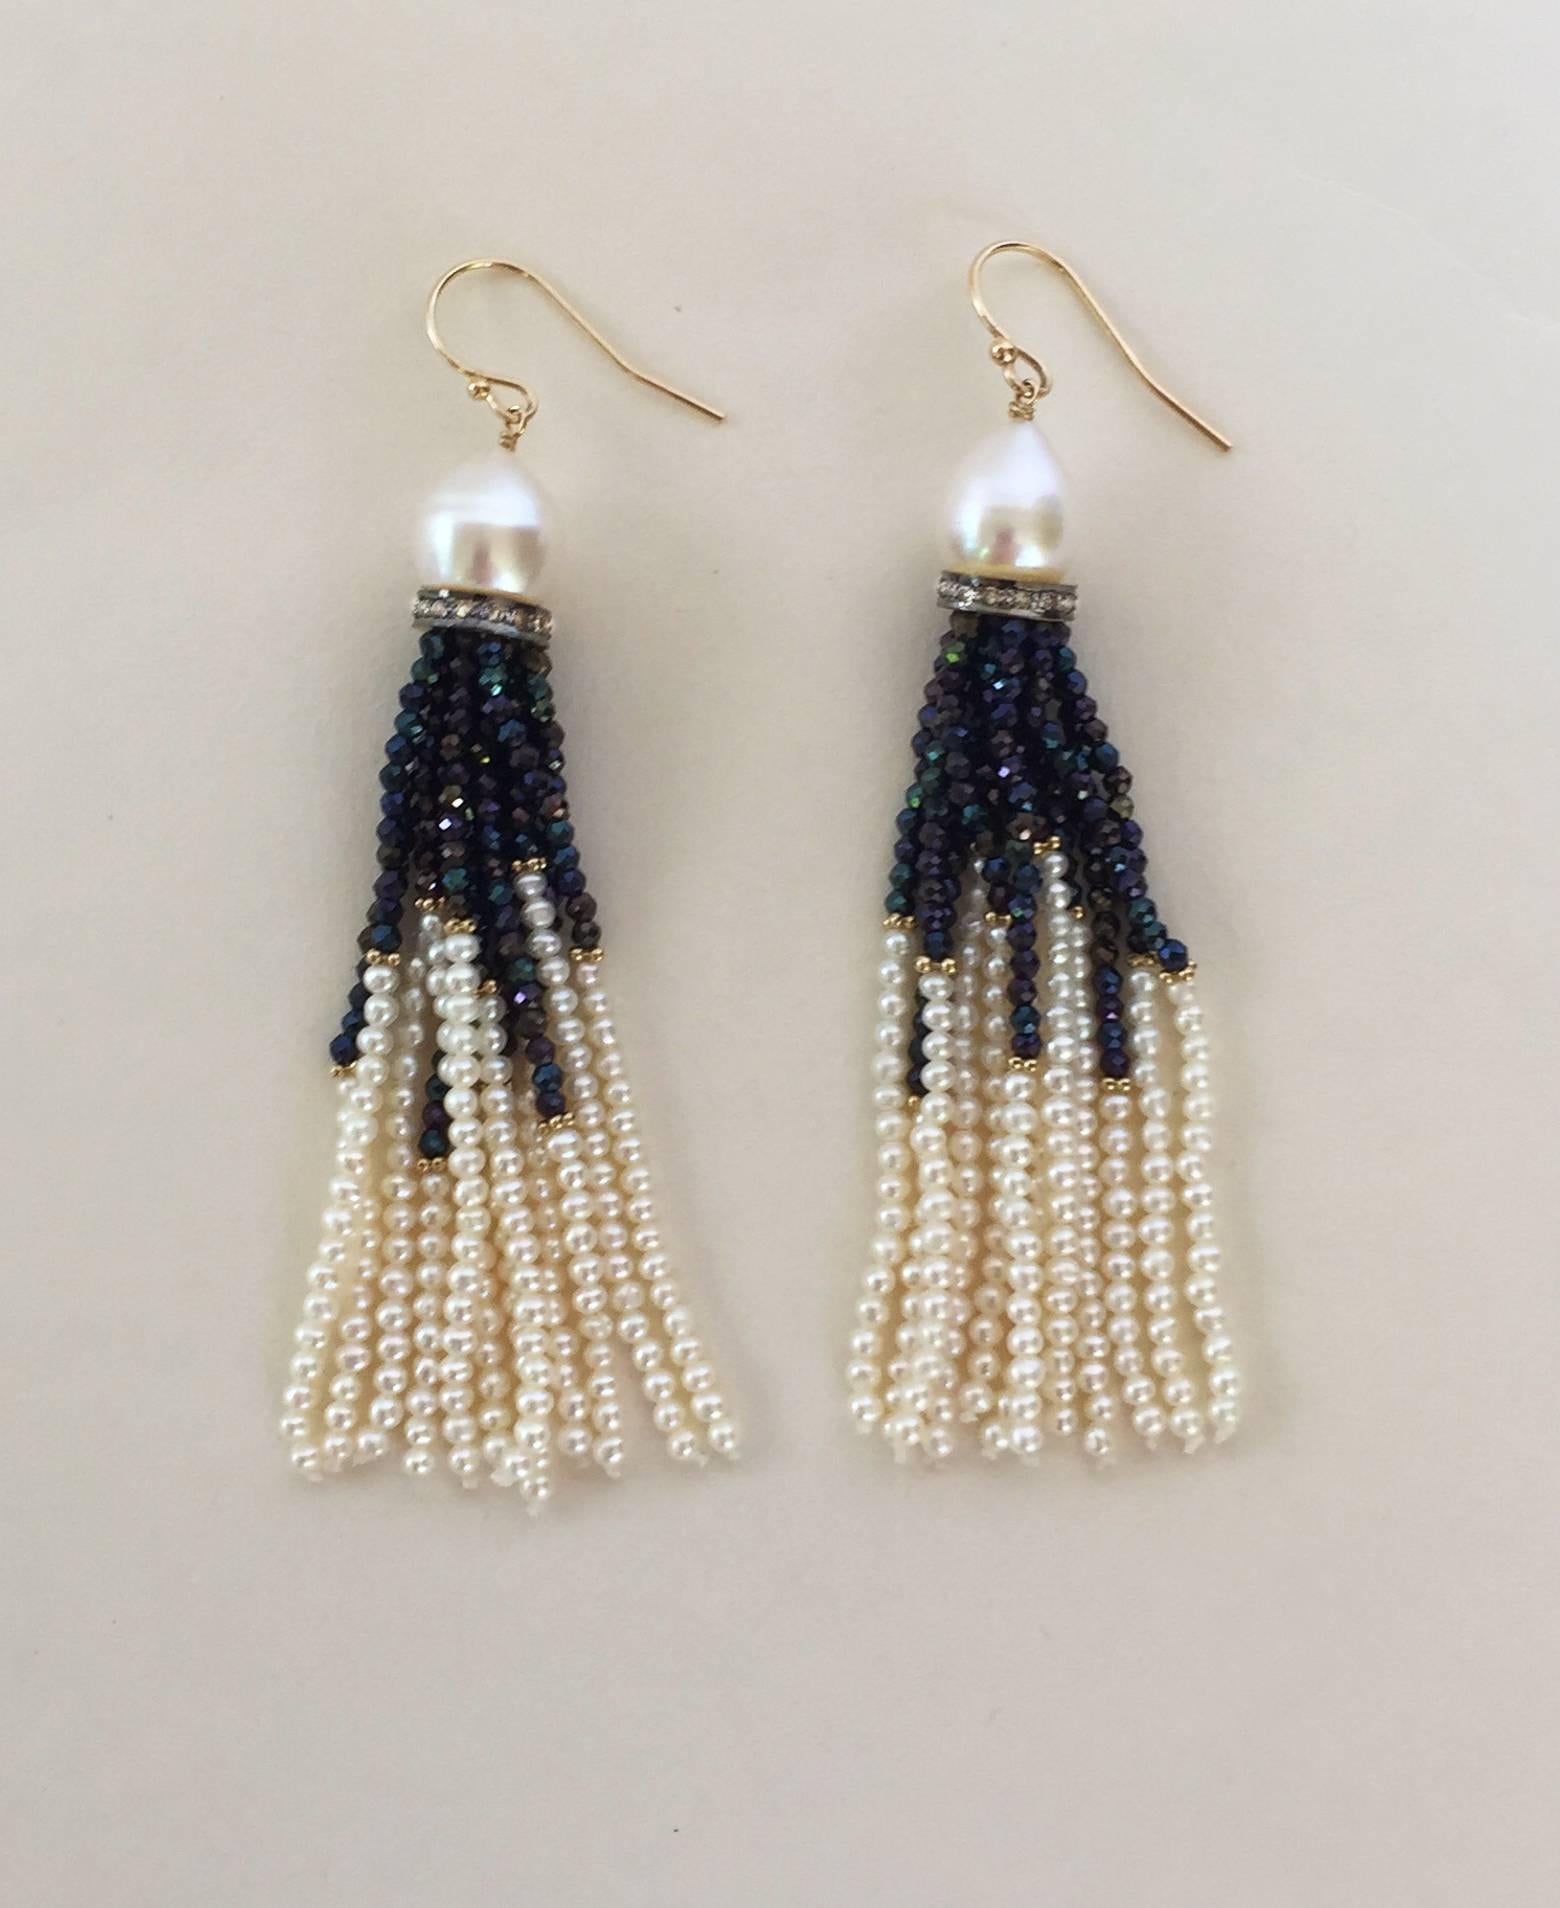 Artisan Pearl, Black Spinel and Gold Dangle Earrings by Marina J